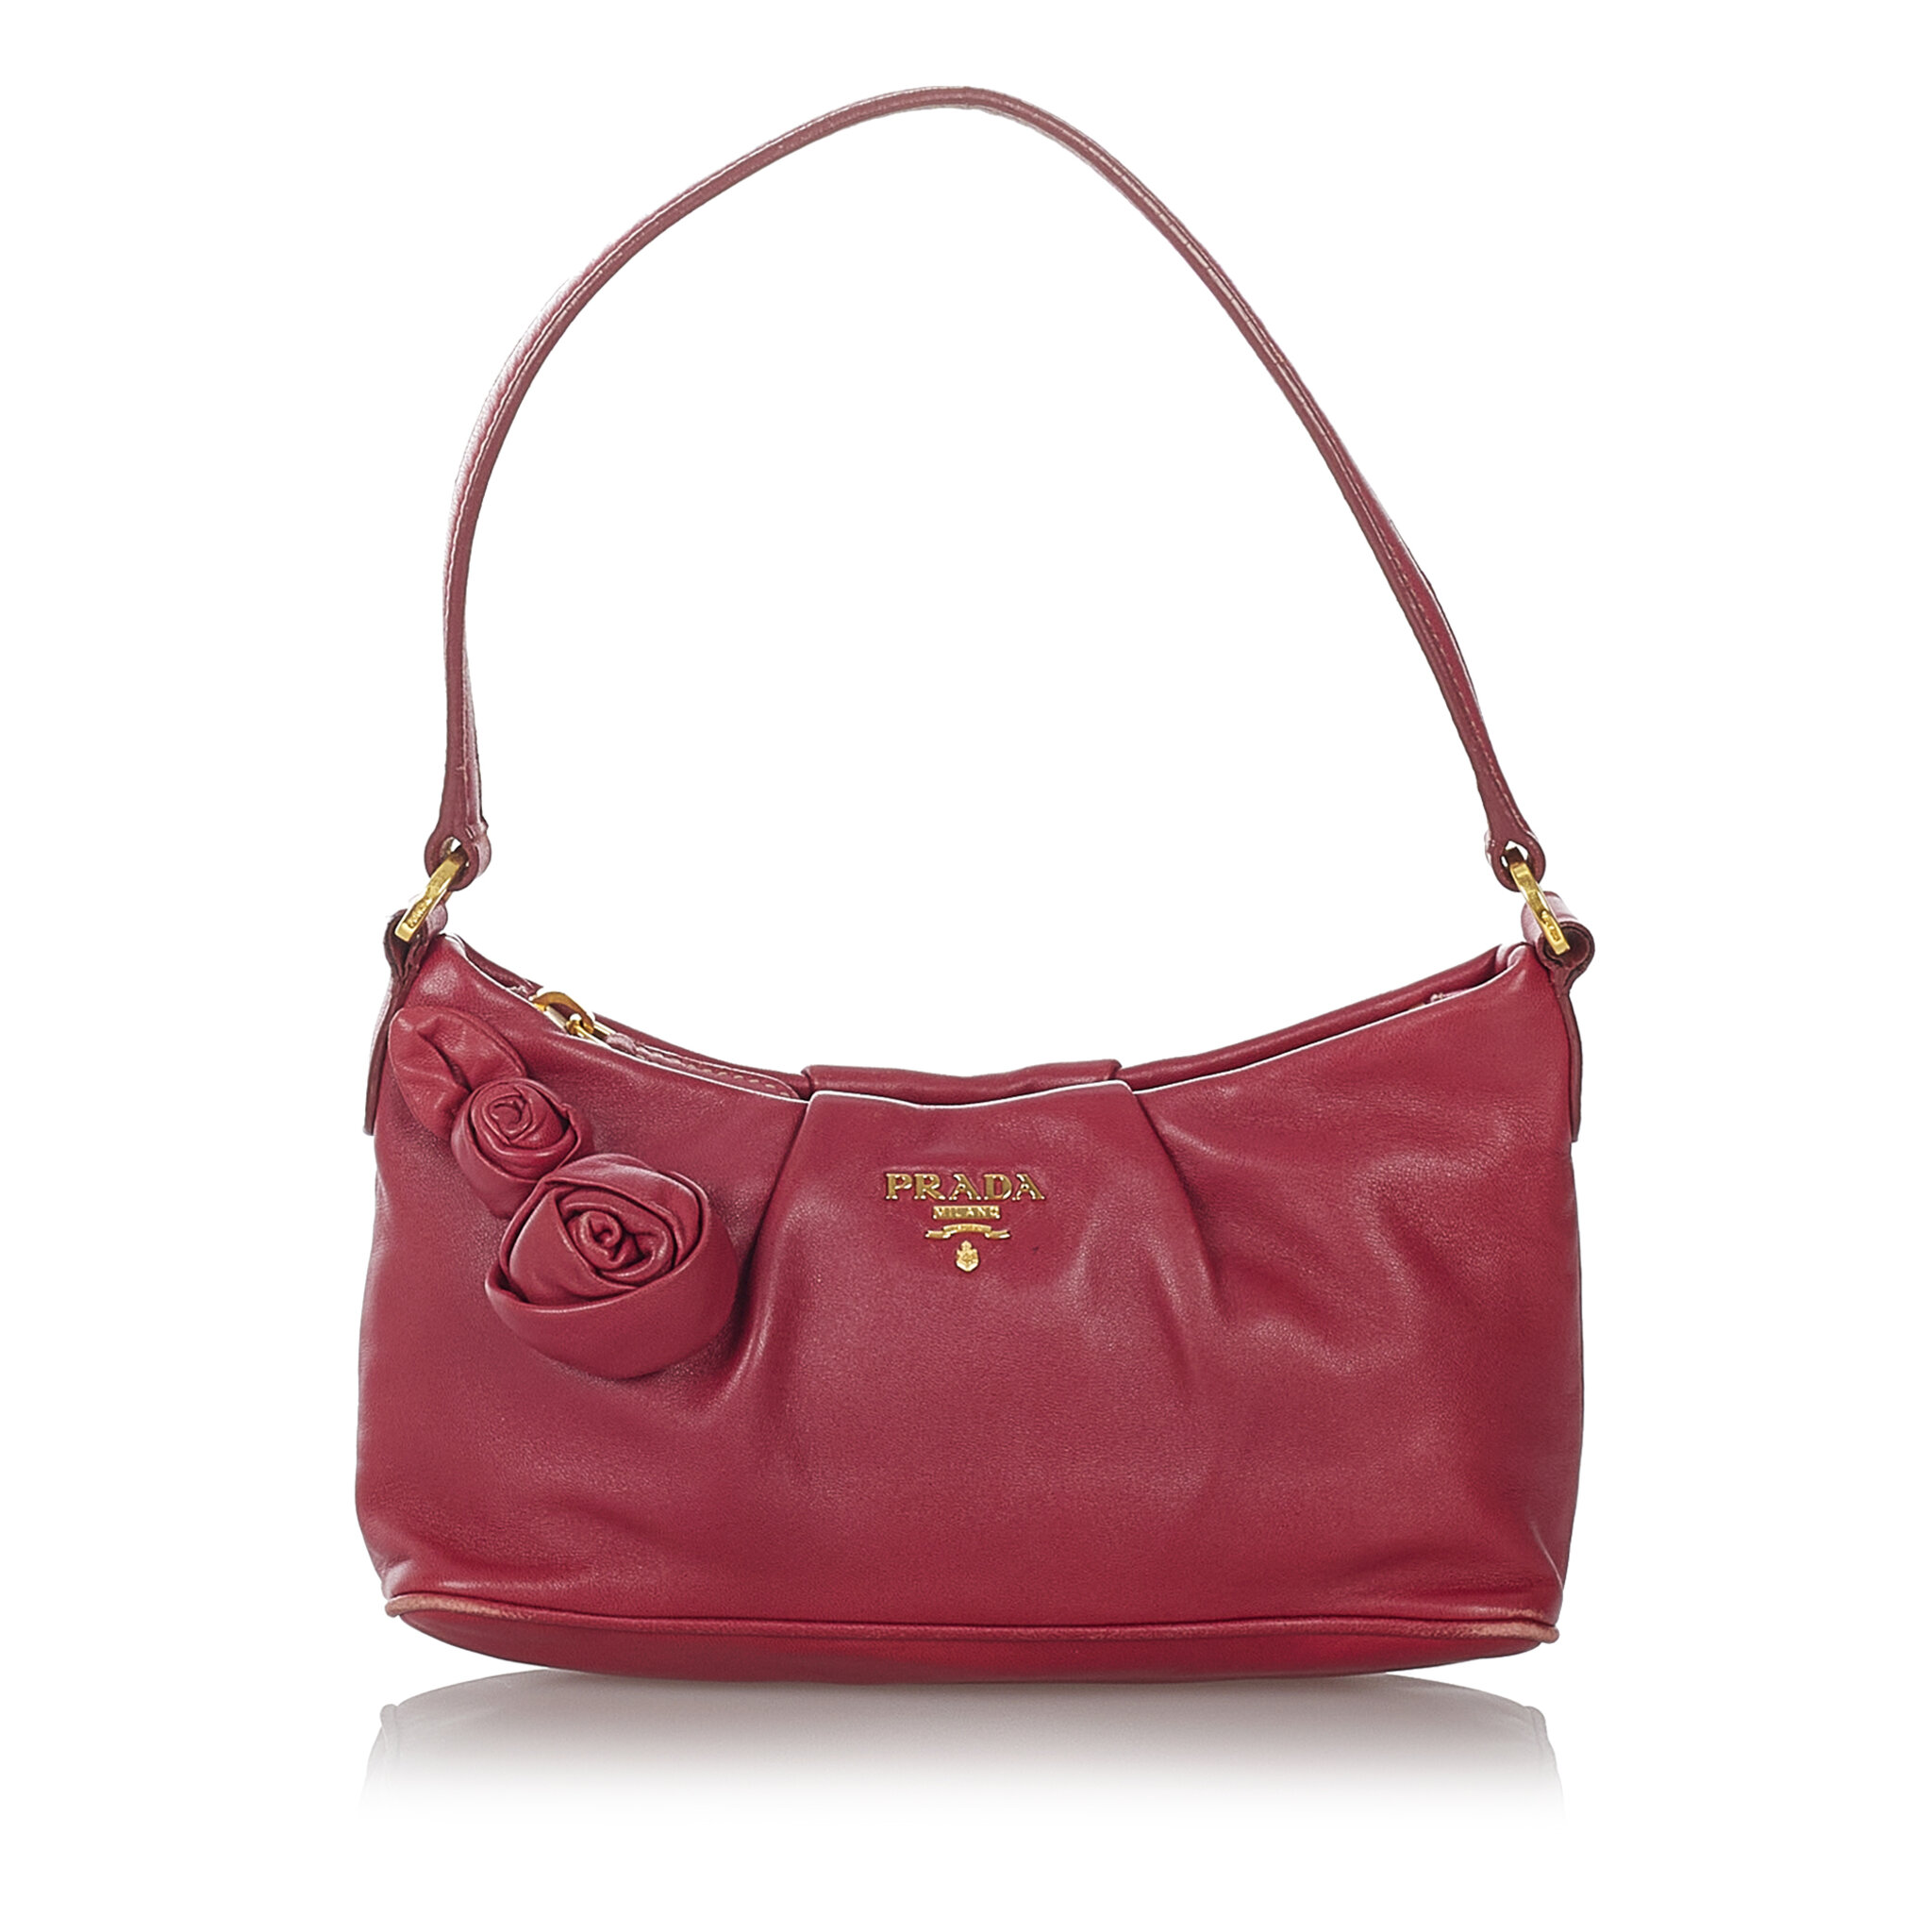 Prada Leather Baguette, ONESIZE, red